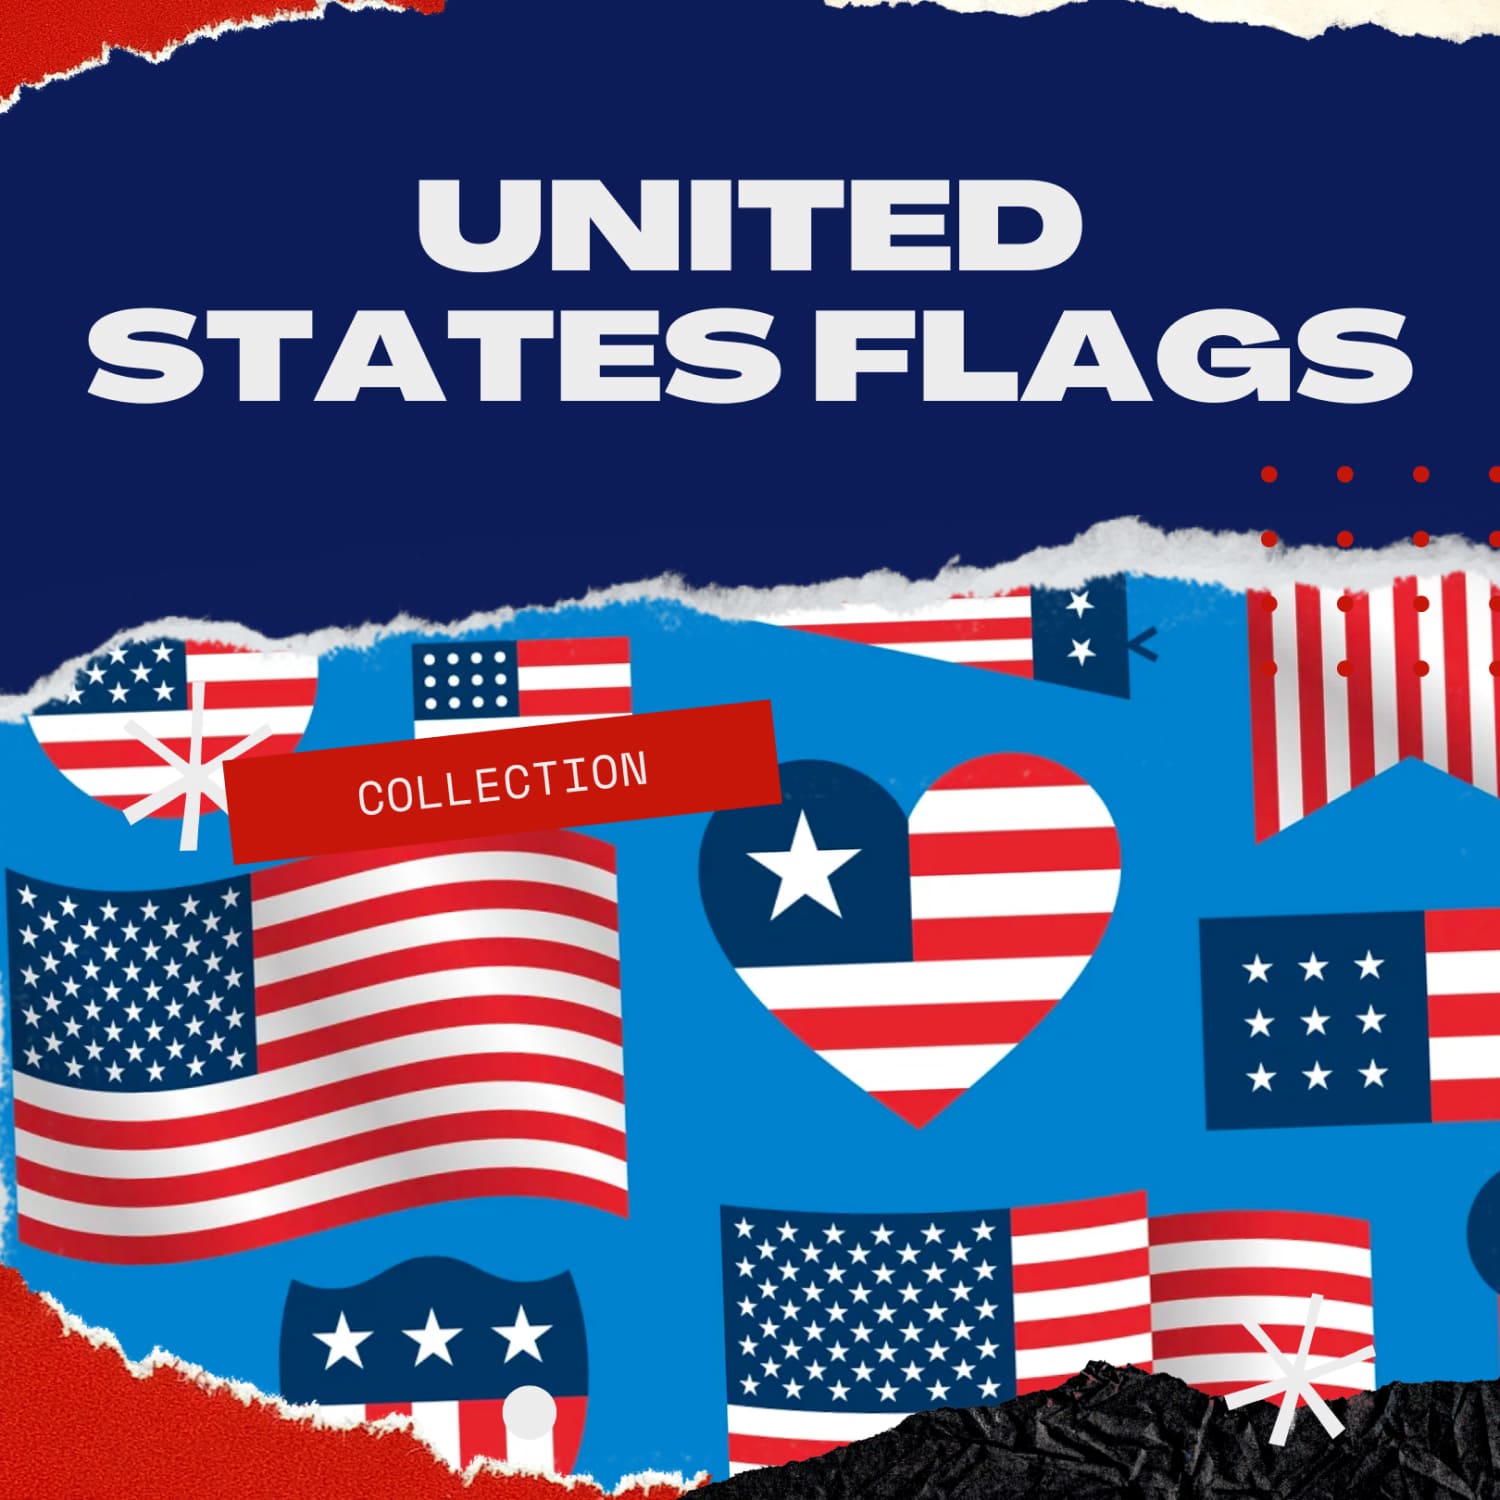 United States Flags.